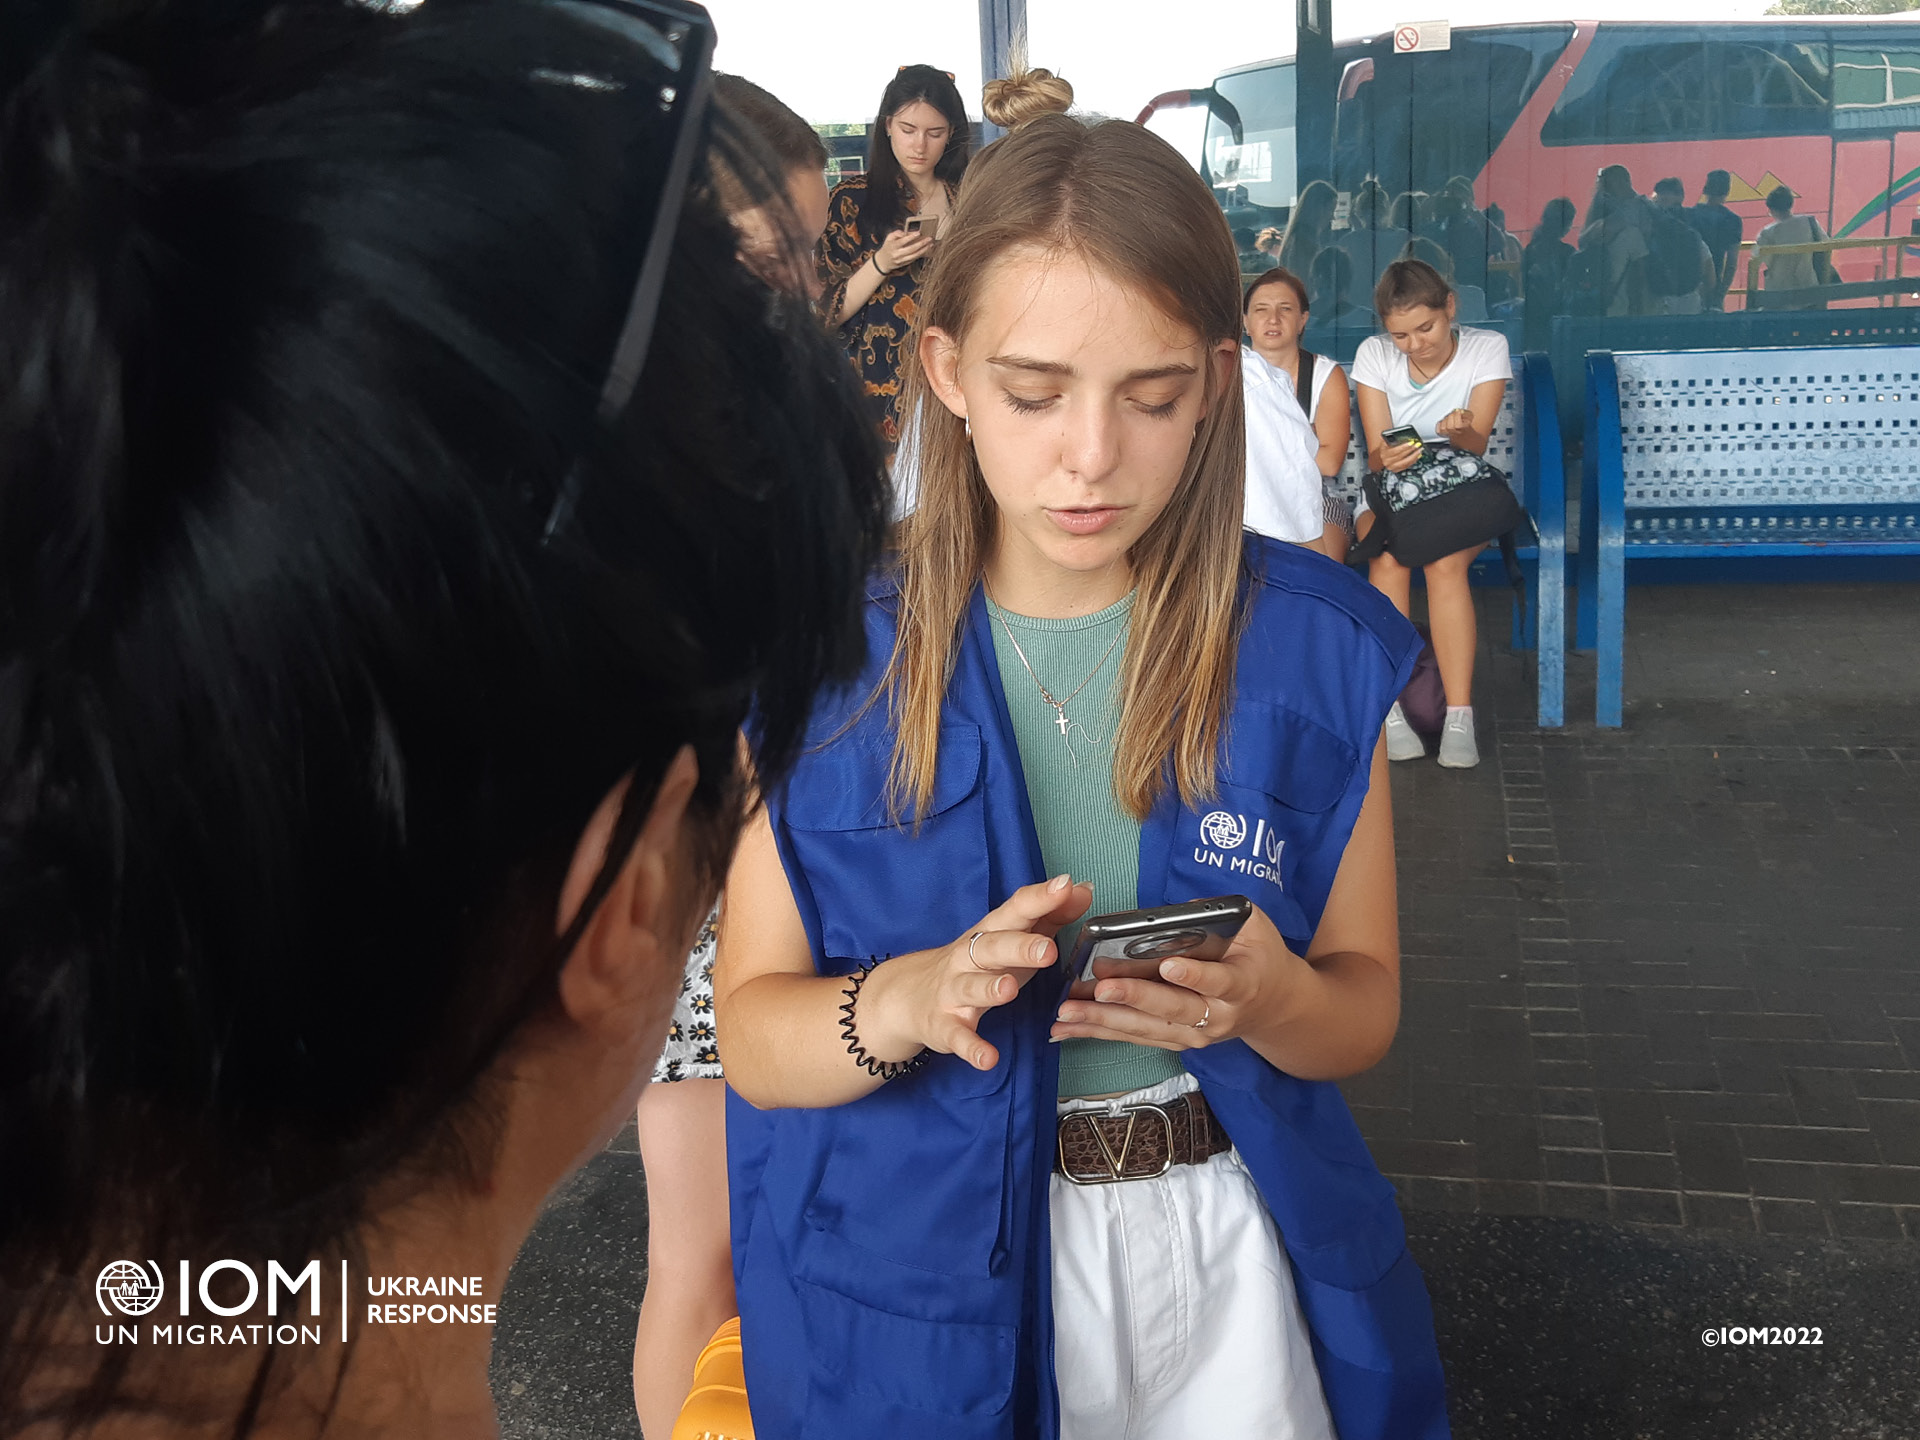 An IOM consultant at the Kosice bus station makes survey with people crossing back to Ukraine from Slovakia about their mobility, needs and intentions. Photo © International Organization for Migration (IOM) 2022.